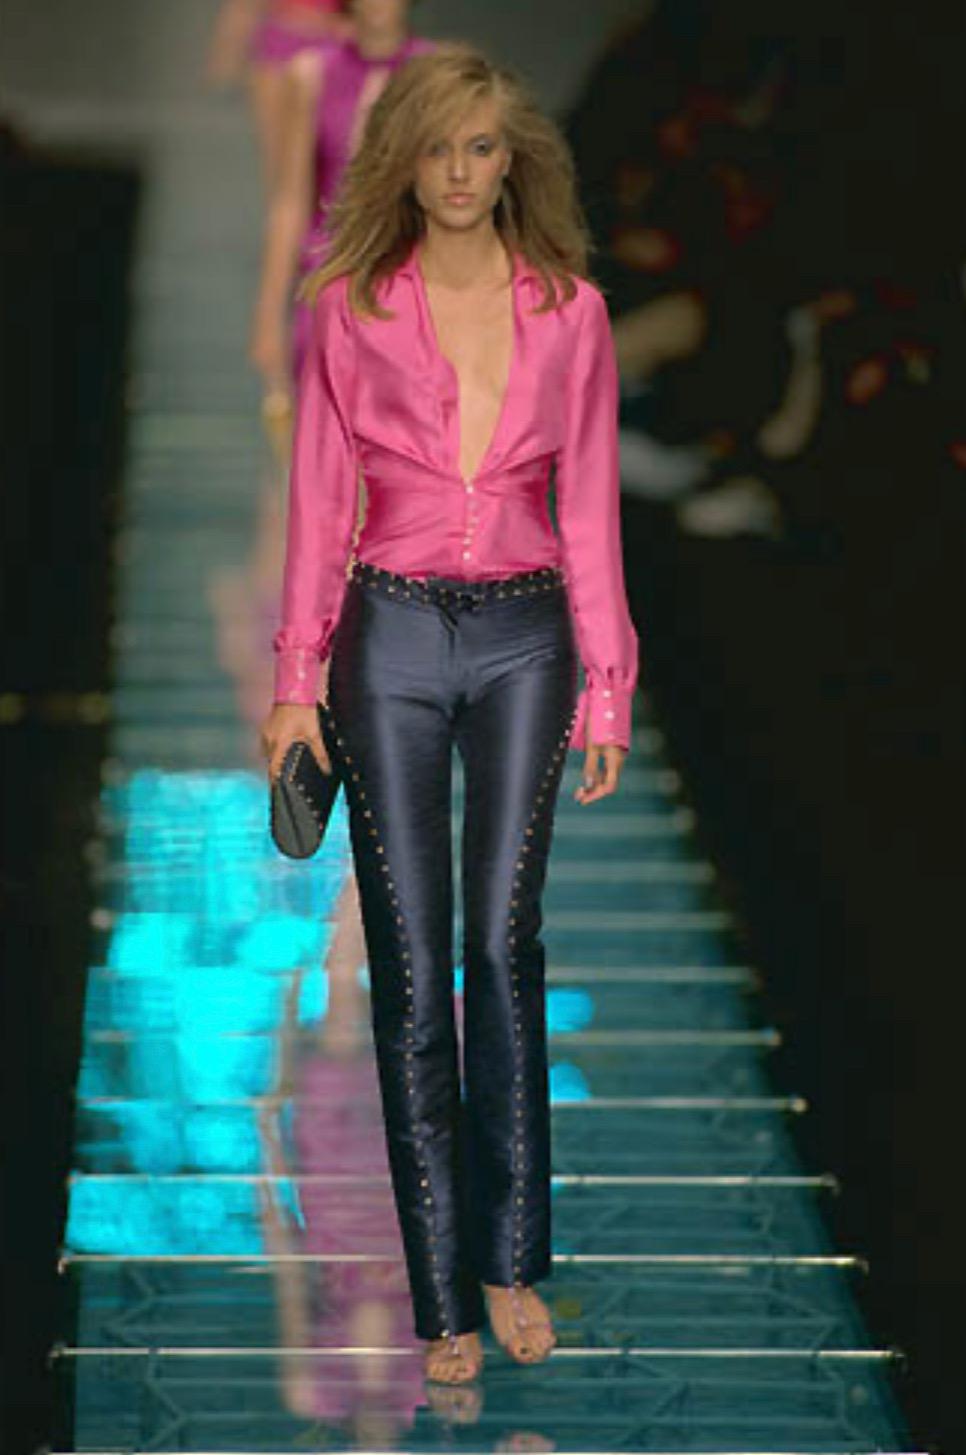 Women's S/S 2000 Gianni Versace by Donatella Pink Satin Crystal Plunge Top Runway